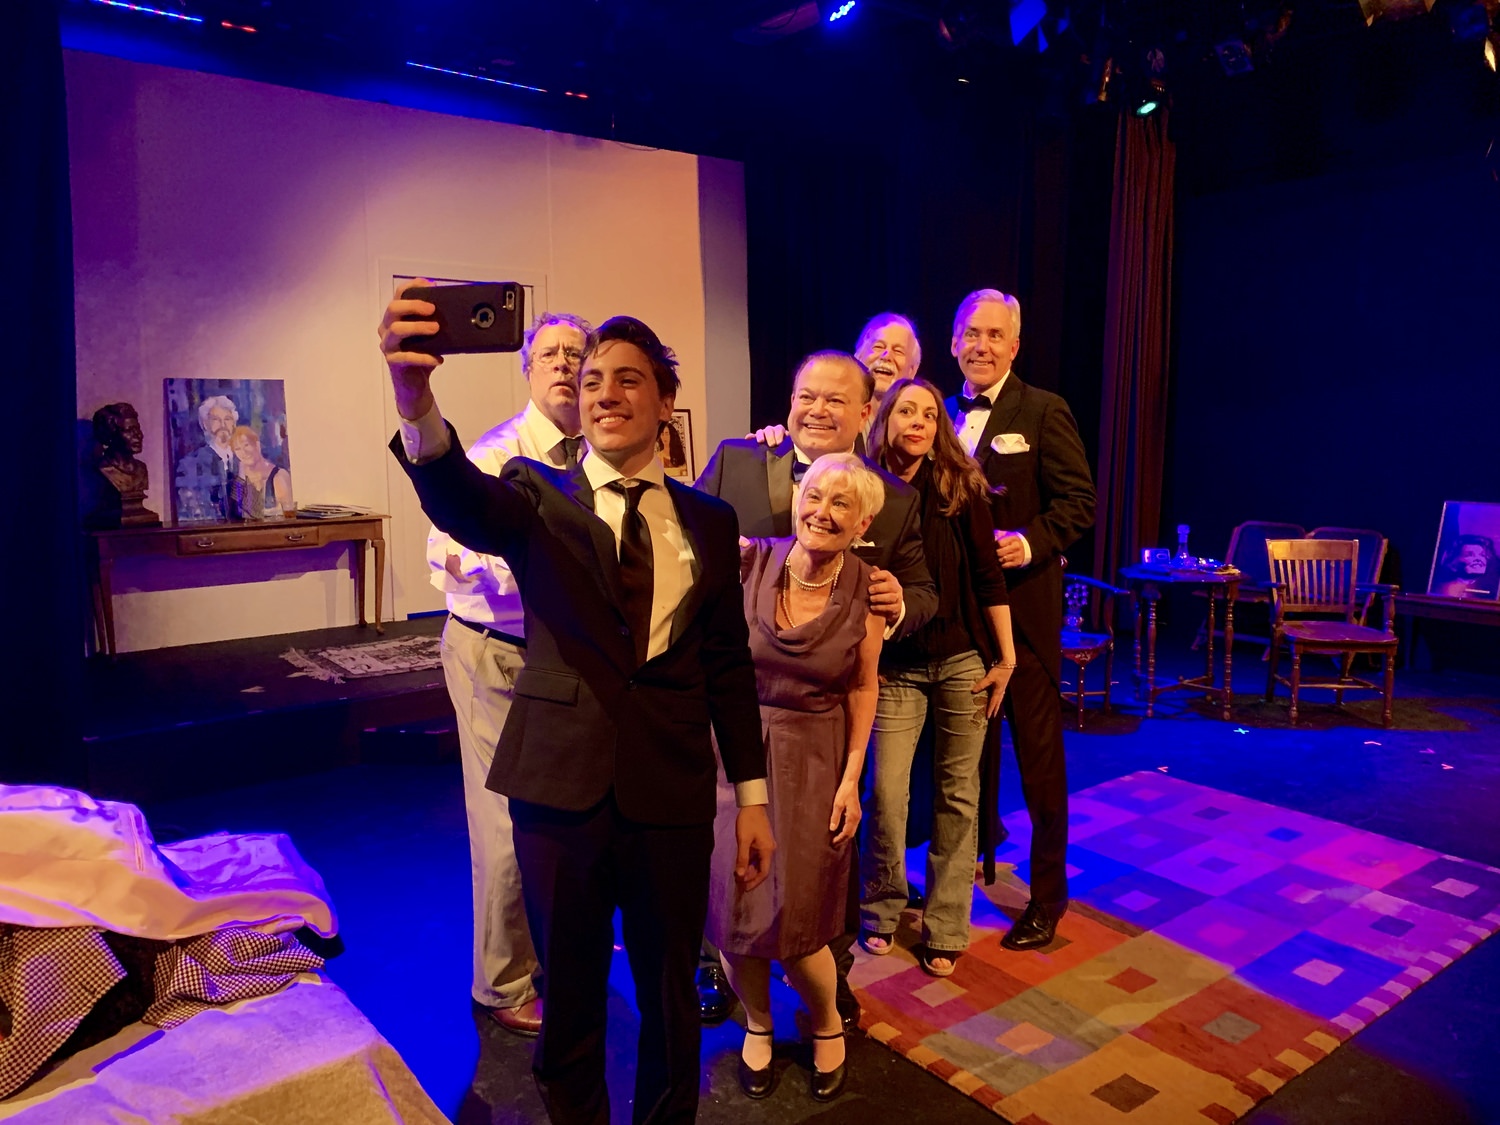 ?Let?s take a selfie first!? Gus takes a group Selfie of the creative team eagerly awaiting the New York Times review of Peter Austin?s new play ?The Golden Egg? in Terrence McNally?s Broadway Hit Play IT?S ONLY A PLAY. Cast includes Scott Terry, Nick McLean, Cathryn Collopy O'Donnell, John Richard Petersen, Phil Parker, Catherine Sadlier and Eric Dunn 1